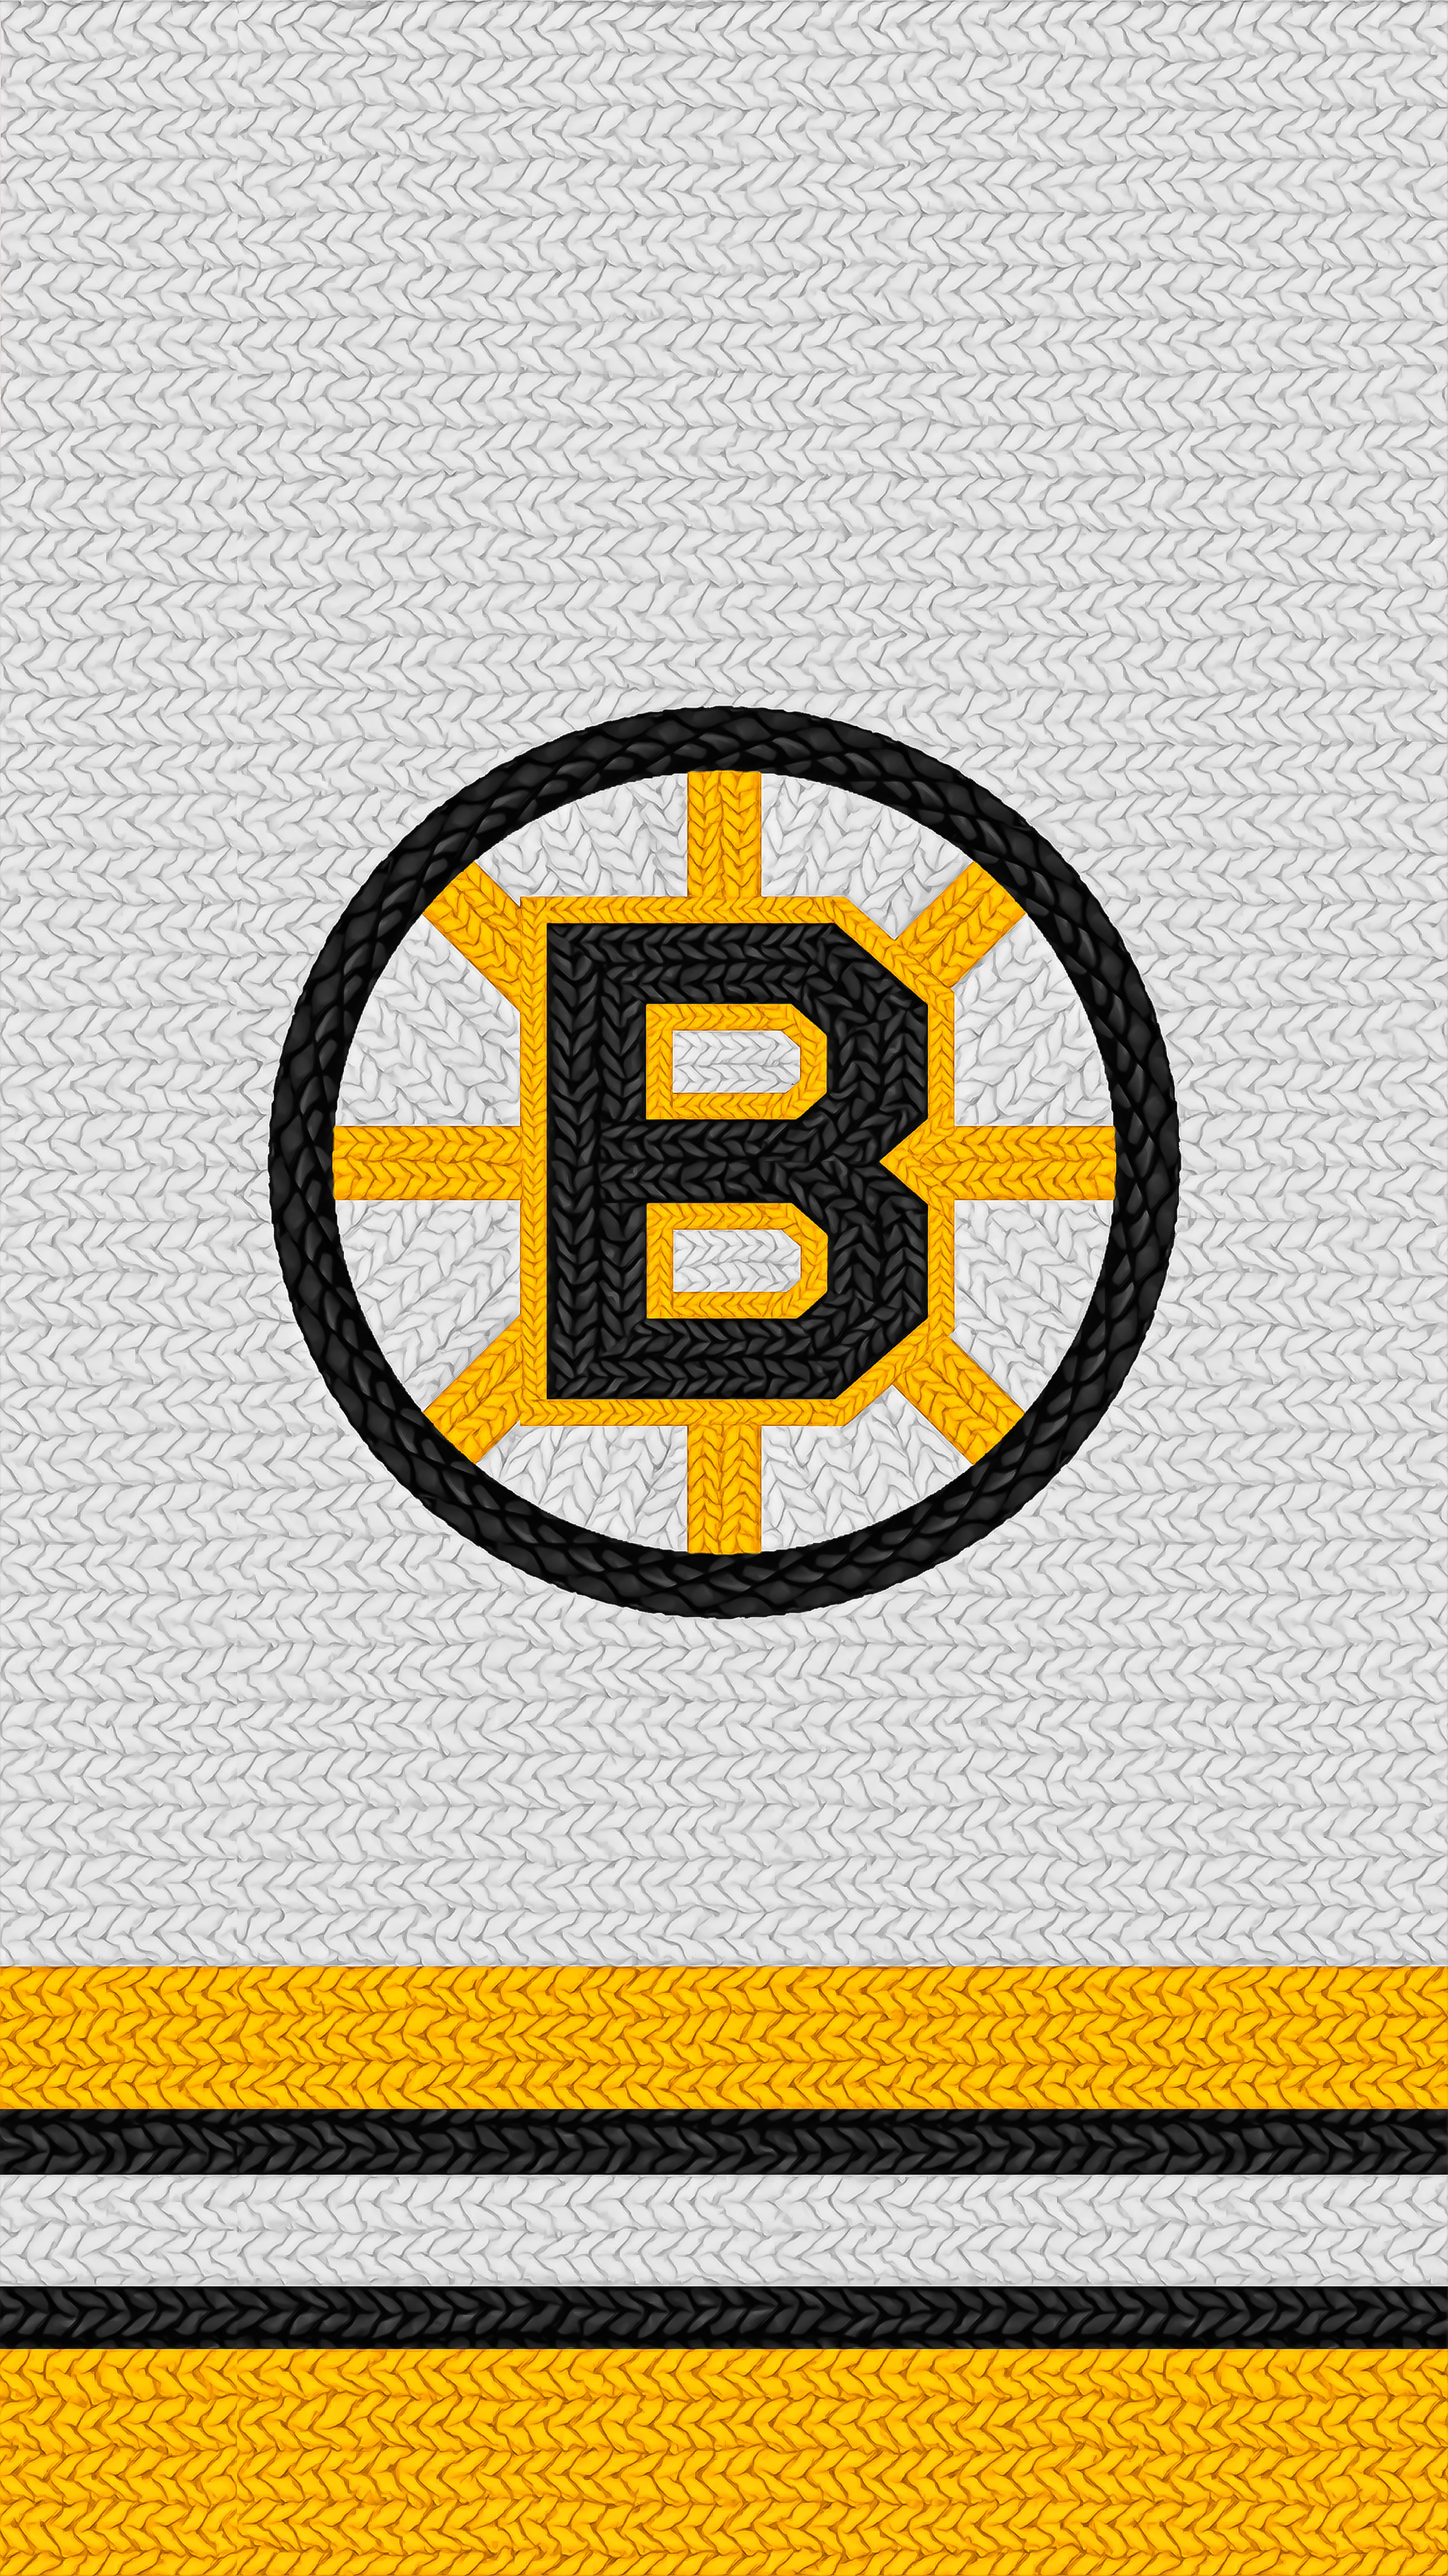 I made some Bruins mobile wallpaper, check my comment for a black, and reverse retro version